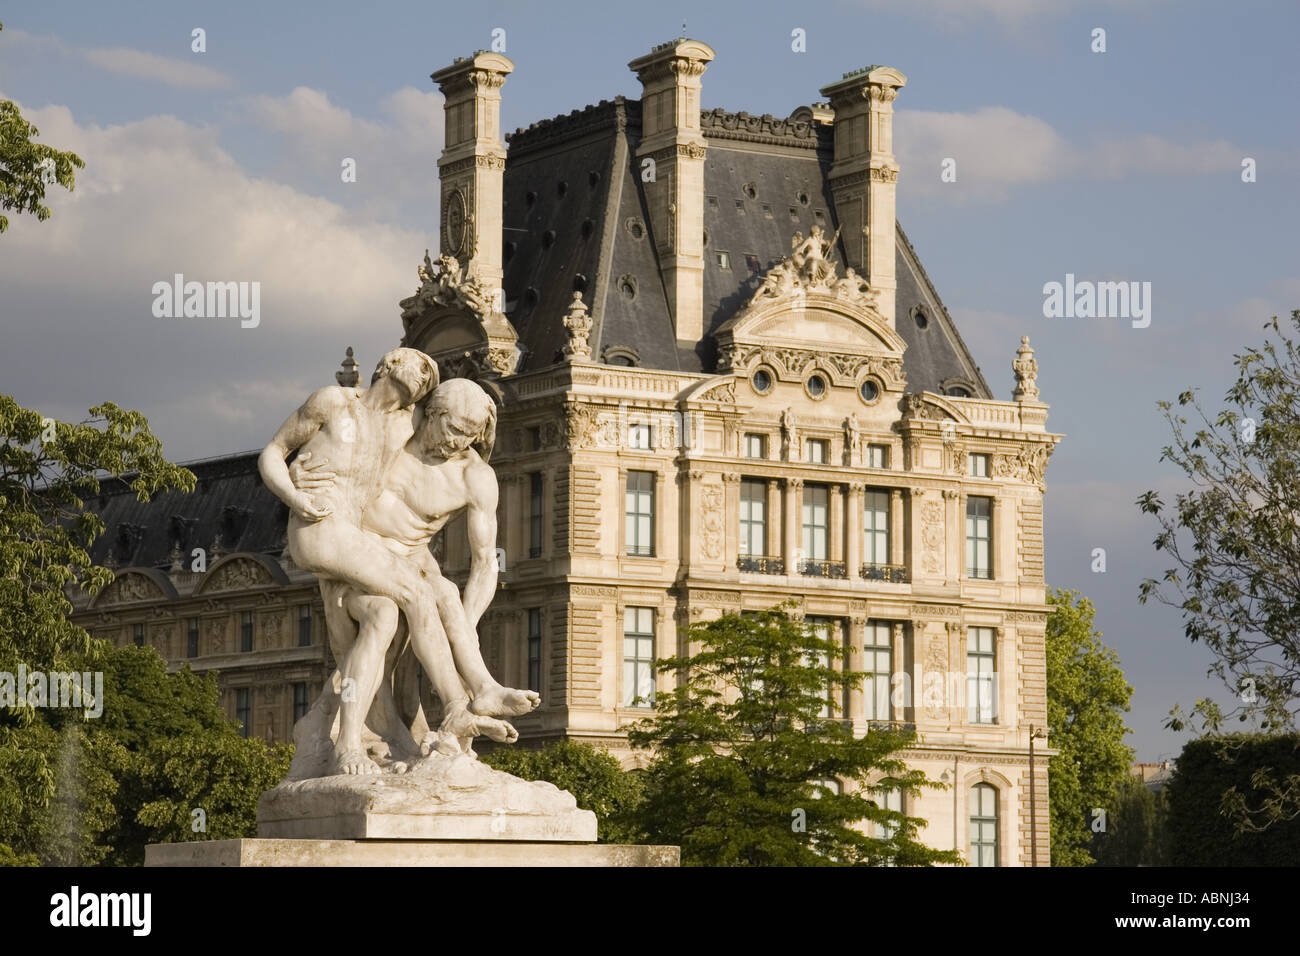 Statues in the Jardin des Tuileries sculpture garden with the Musee du Louvre in back Paris France Stock Photo